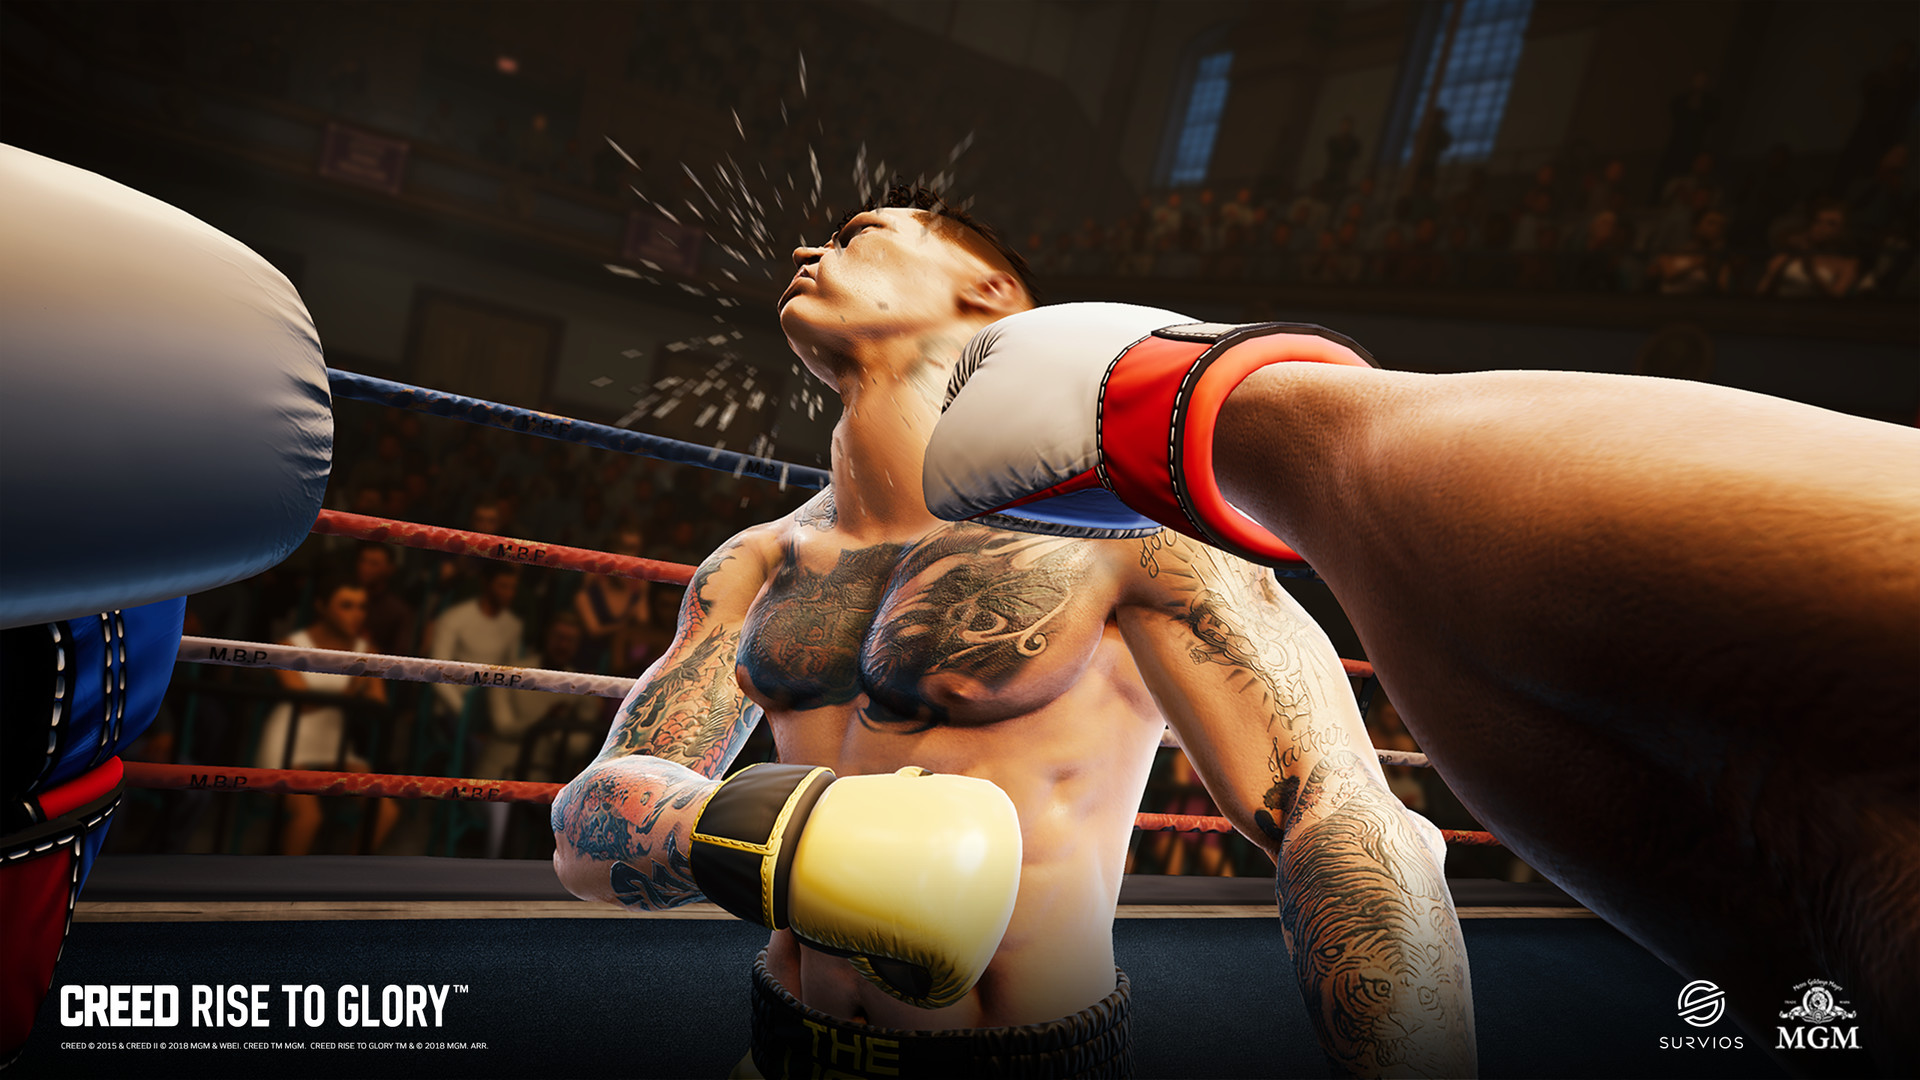 Oculus Quest 游戏《Creed: Rise to Glory》奎恩拳击 -荣耀擂台